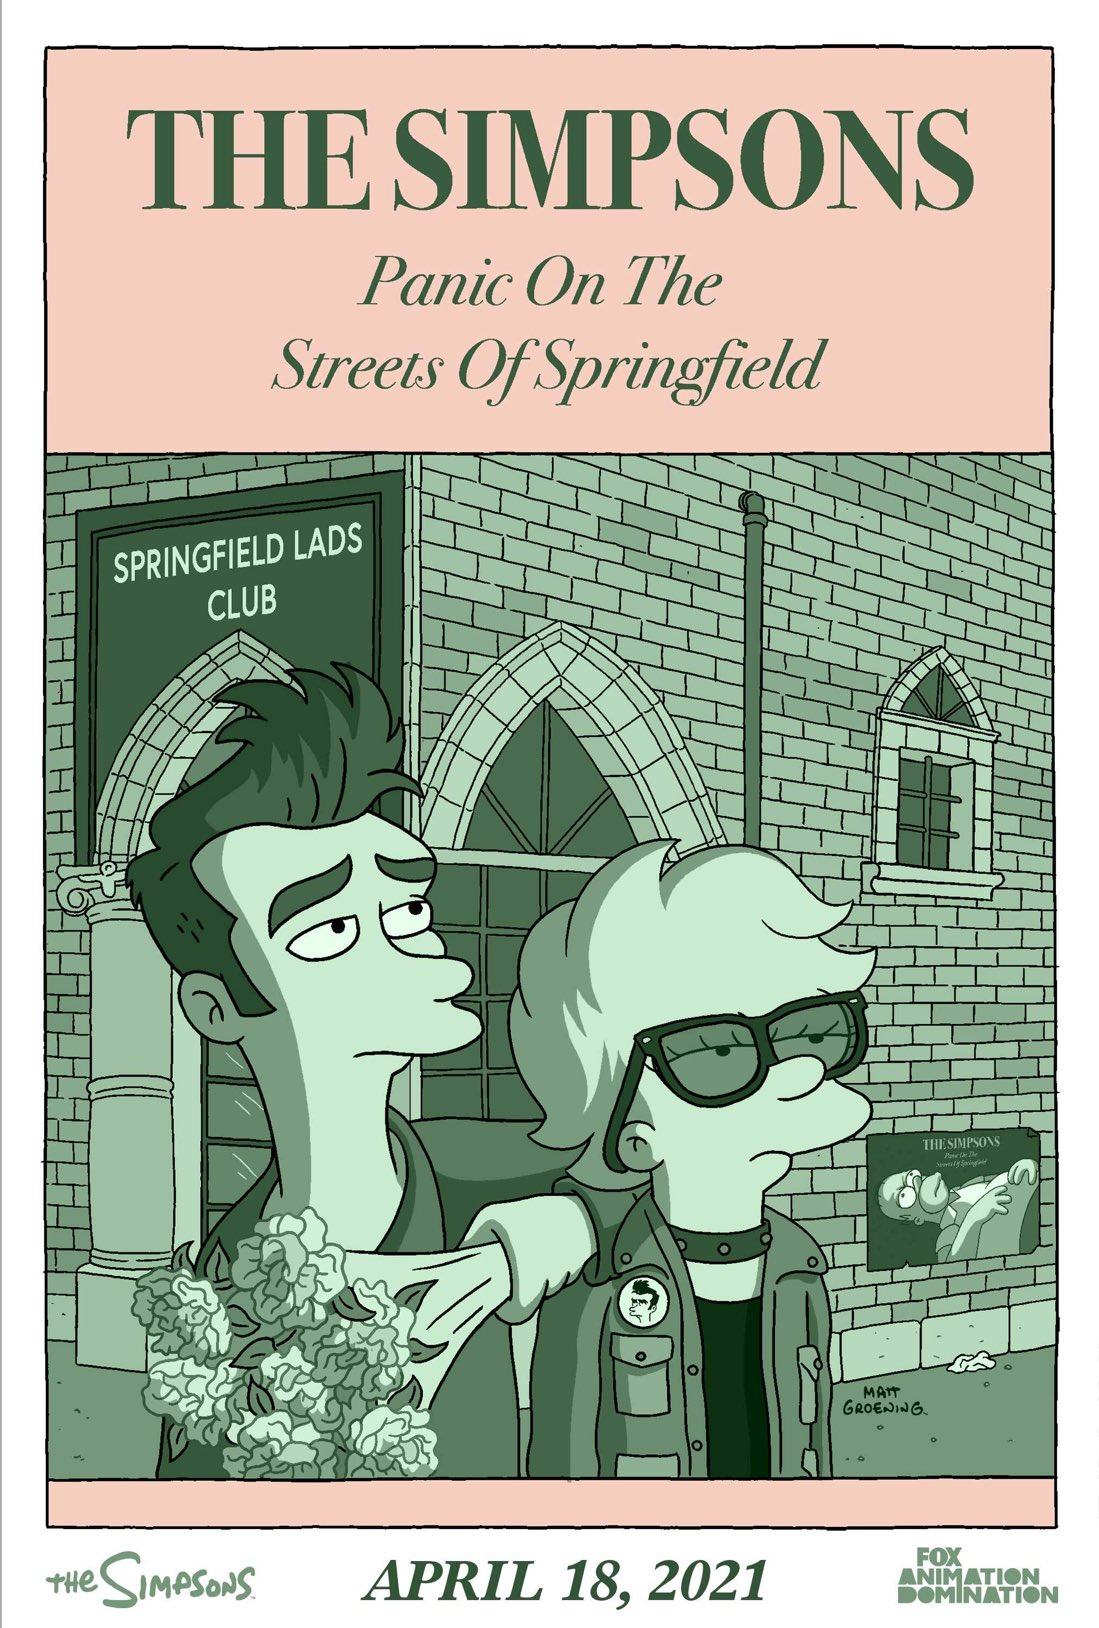 Panic_on_the_Streets_of_Springfield_poster